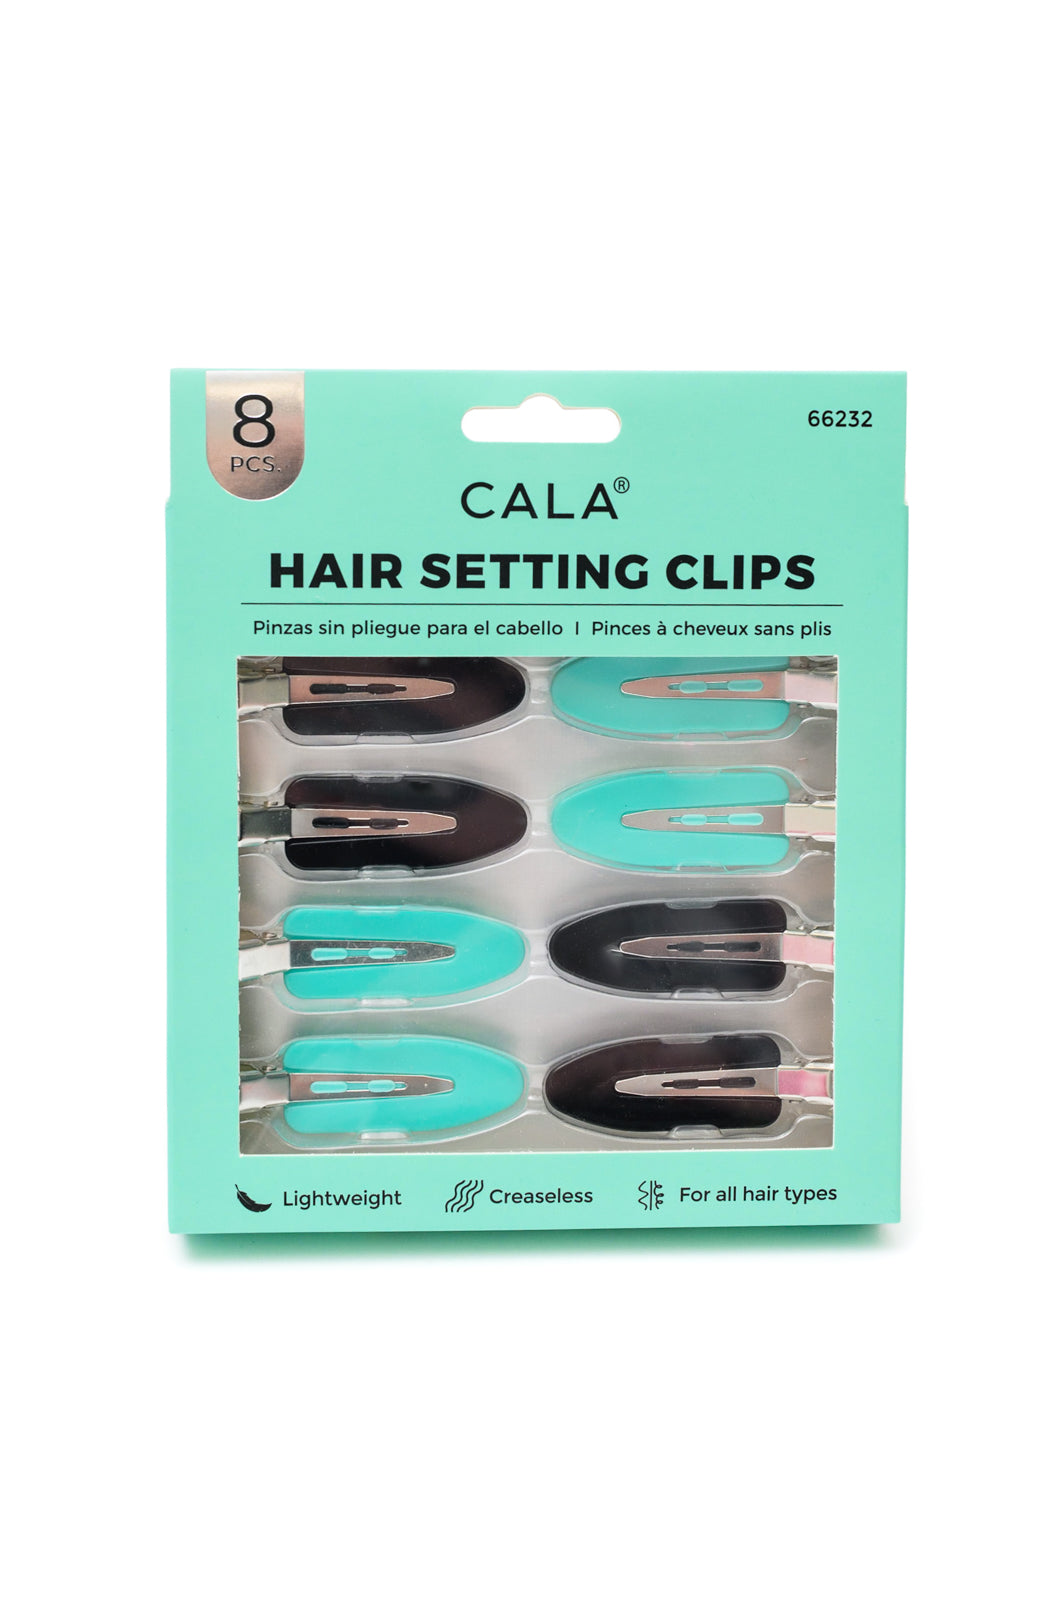 CALA Hair Setting Clips - Set of 8 Teal and Black Clips in Teal Package |   |  Casual Chic Boutique